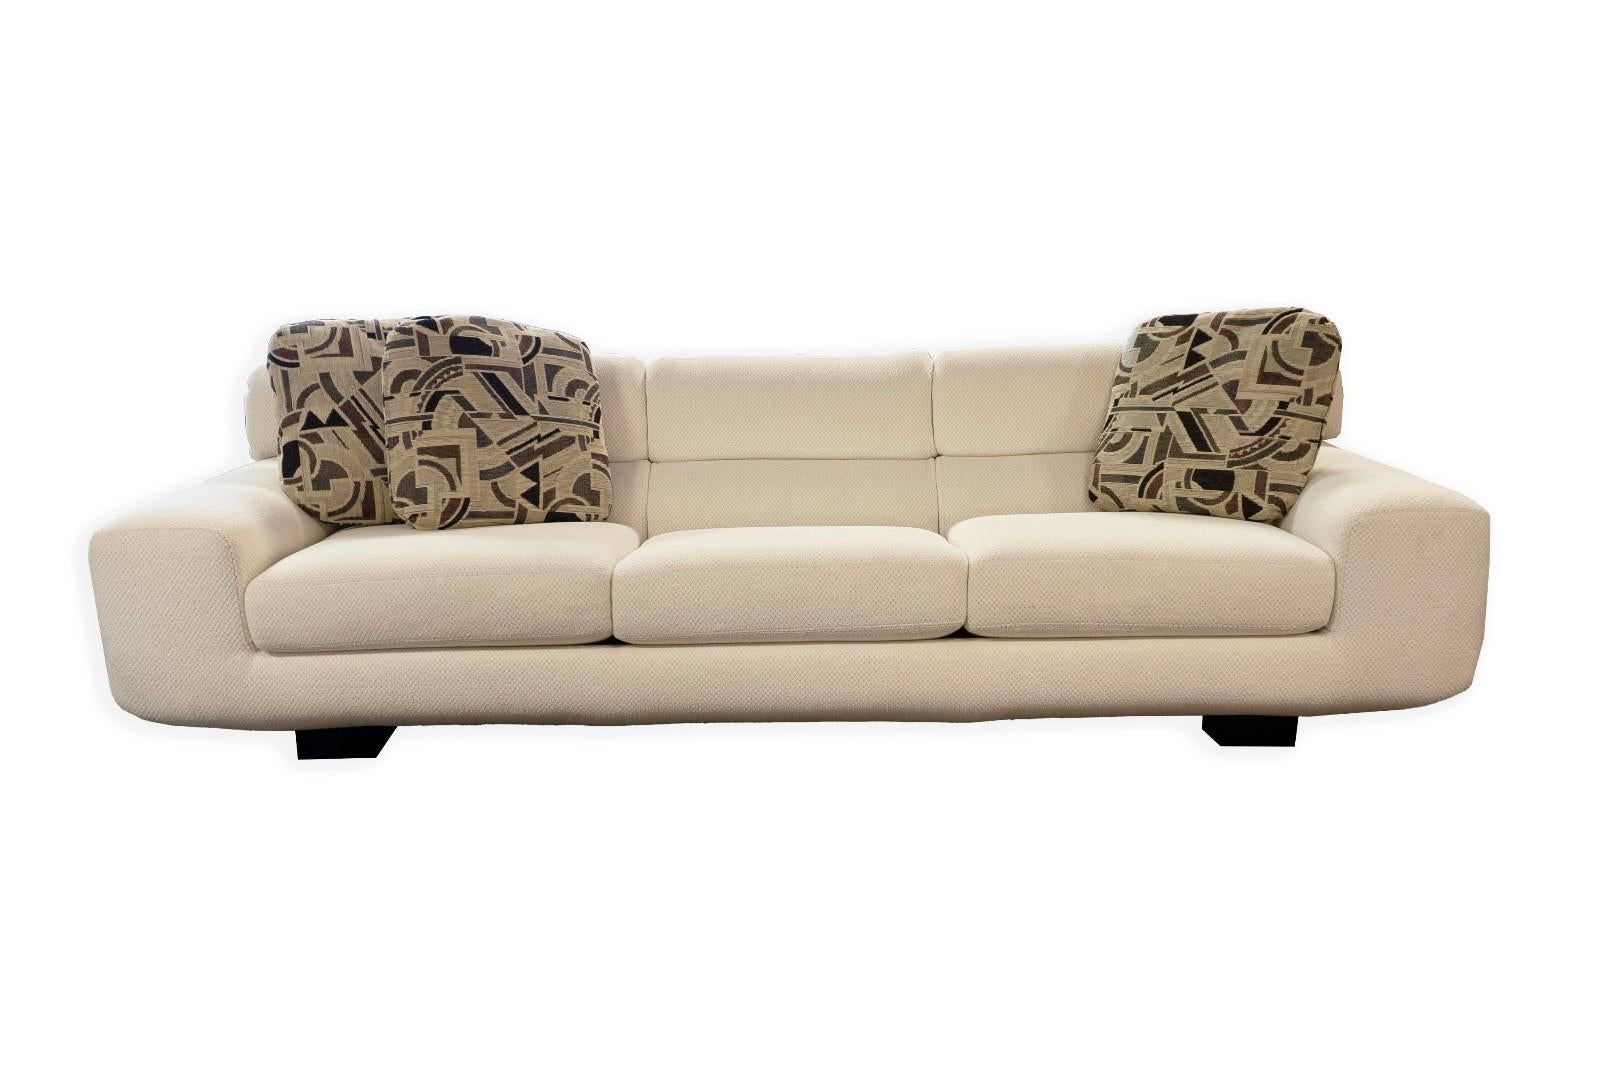 Elevate your living space with the Contemporary Modern White Sofa and Lounge Chair from Preview Furniture Corporation. Distinguished by its clean lines and minimalist aesthetics, this set exudes a timeless sophistication that effortlessly